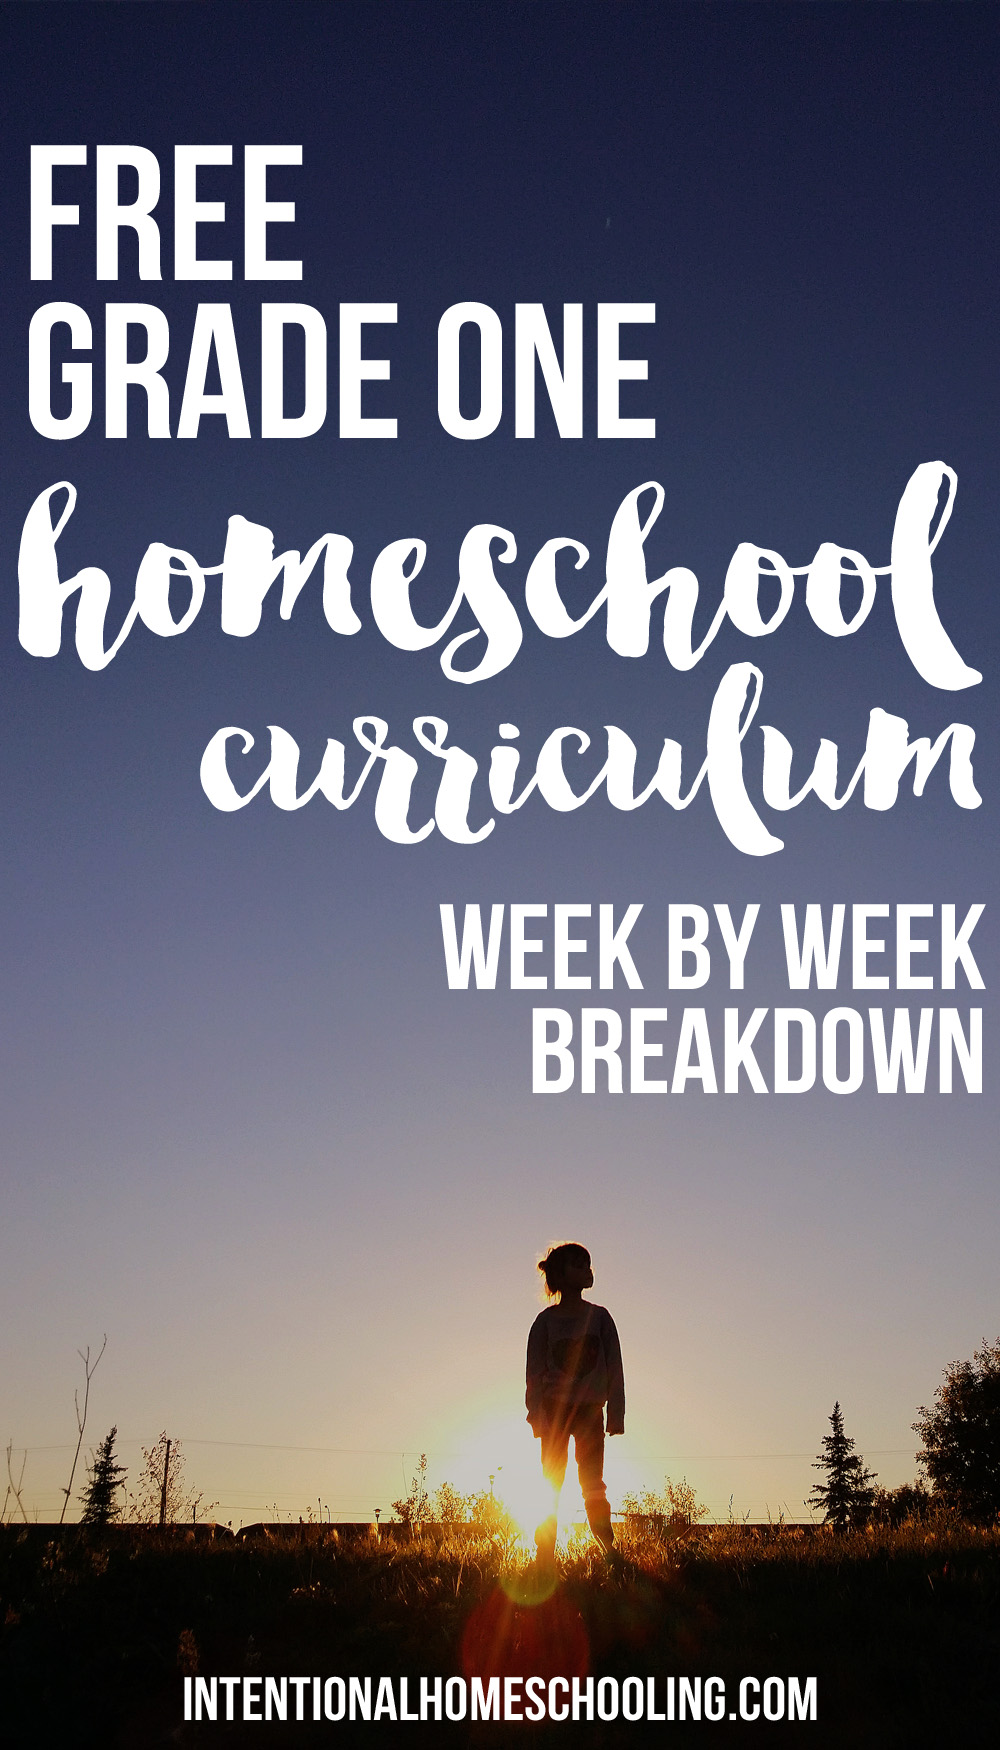 Our Homemade Grade One Homeschool Curriculum - Weekly breakdown - includes Bible, writing, reading, math, science, history, geography, art and music!